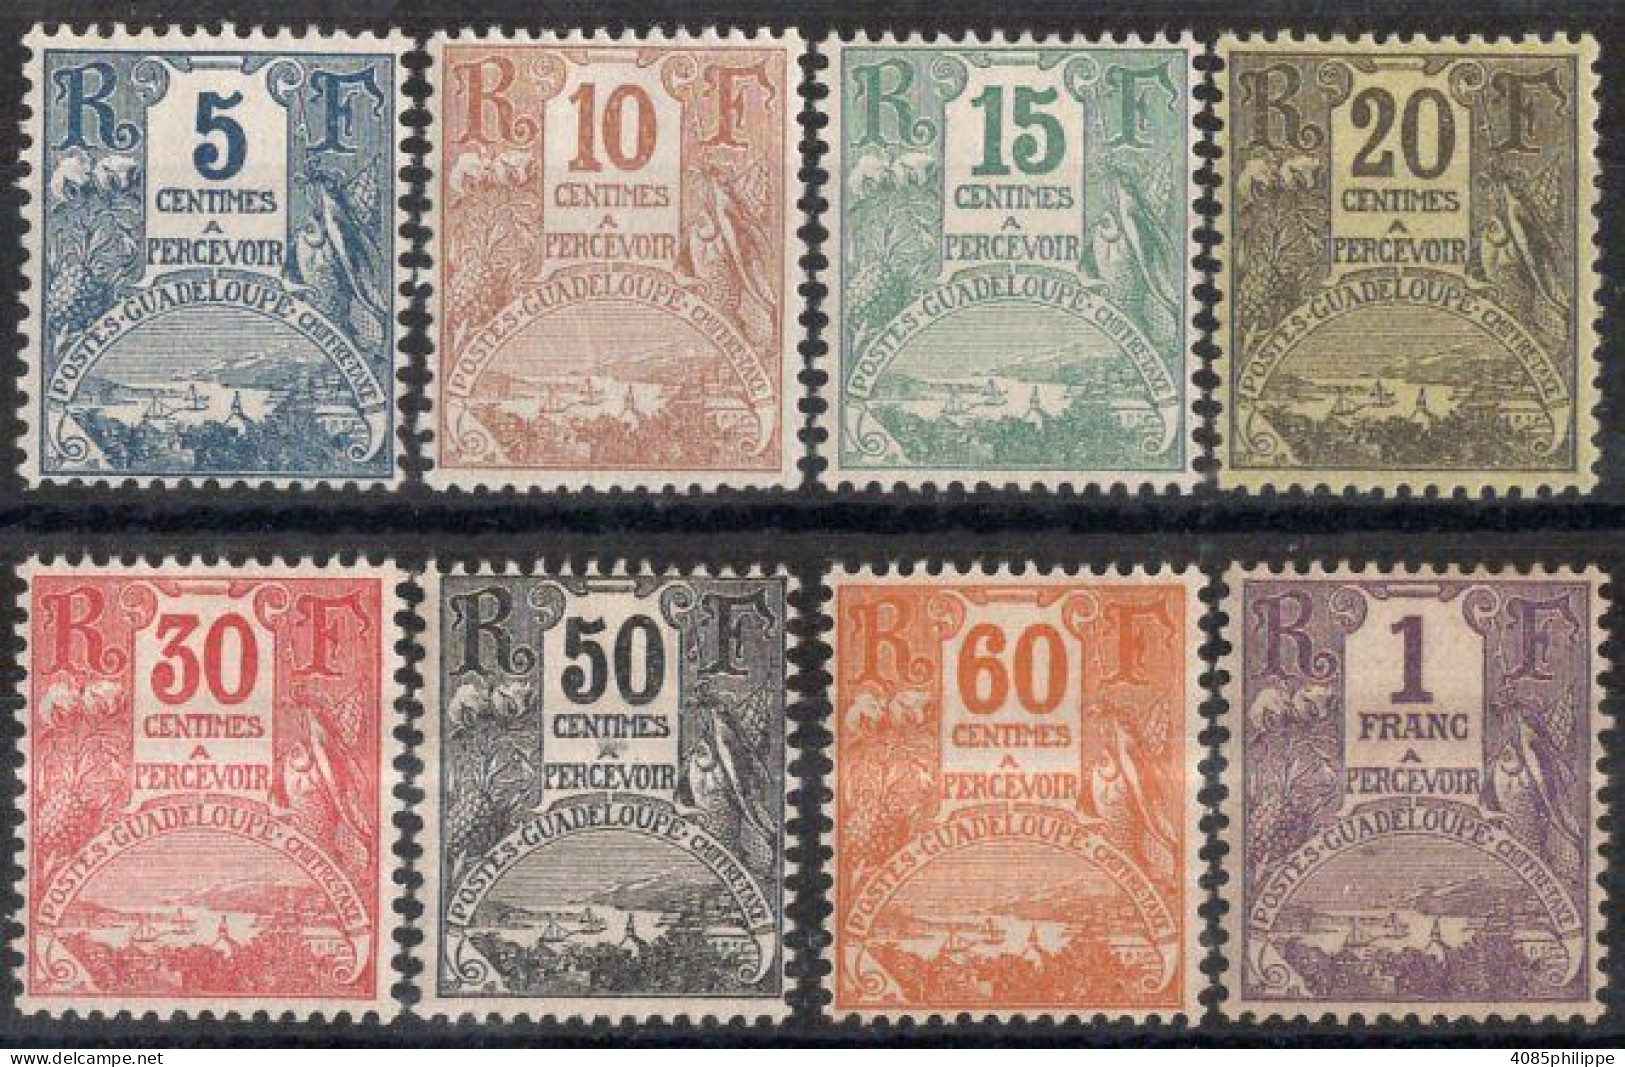 Guadeloupe Timbres-Taxe N°15 à 22* Neufs Charnières TB Cote 19€00 - Impuestos